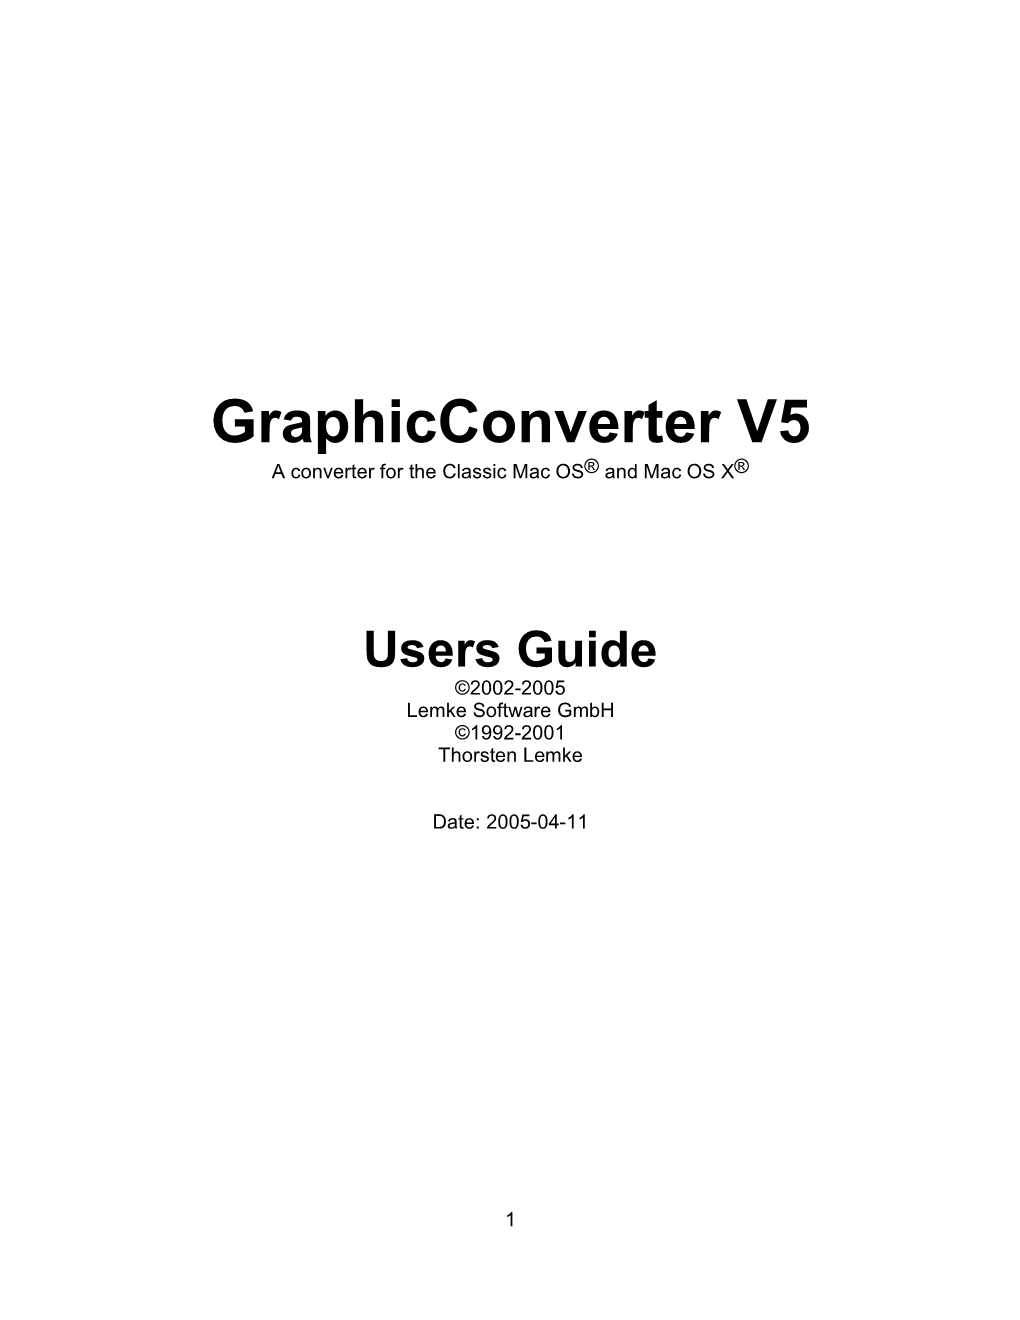 Graphicconverter V5 a Converter for the Classic Mac OS® and Mac OS X®